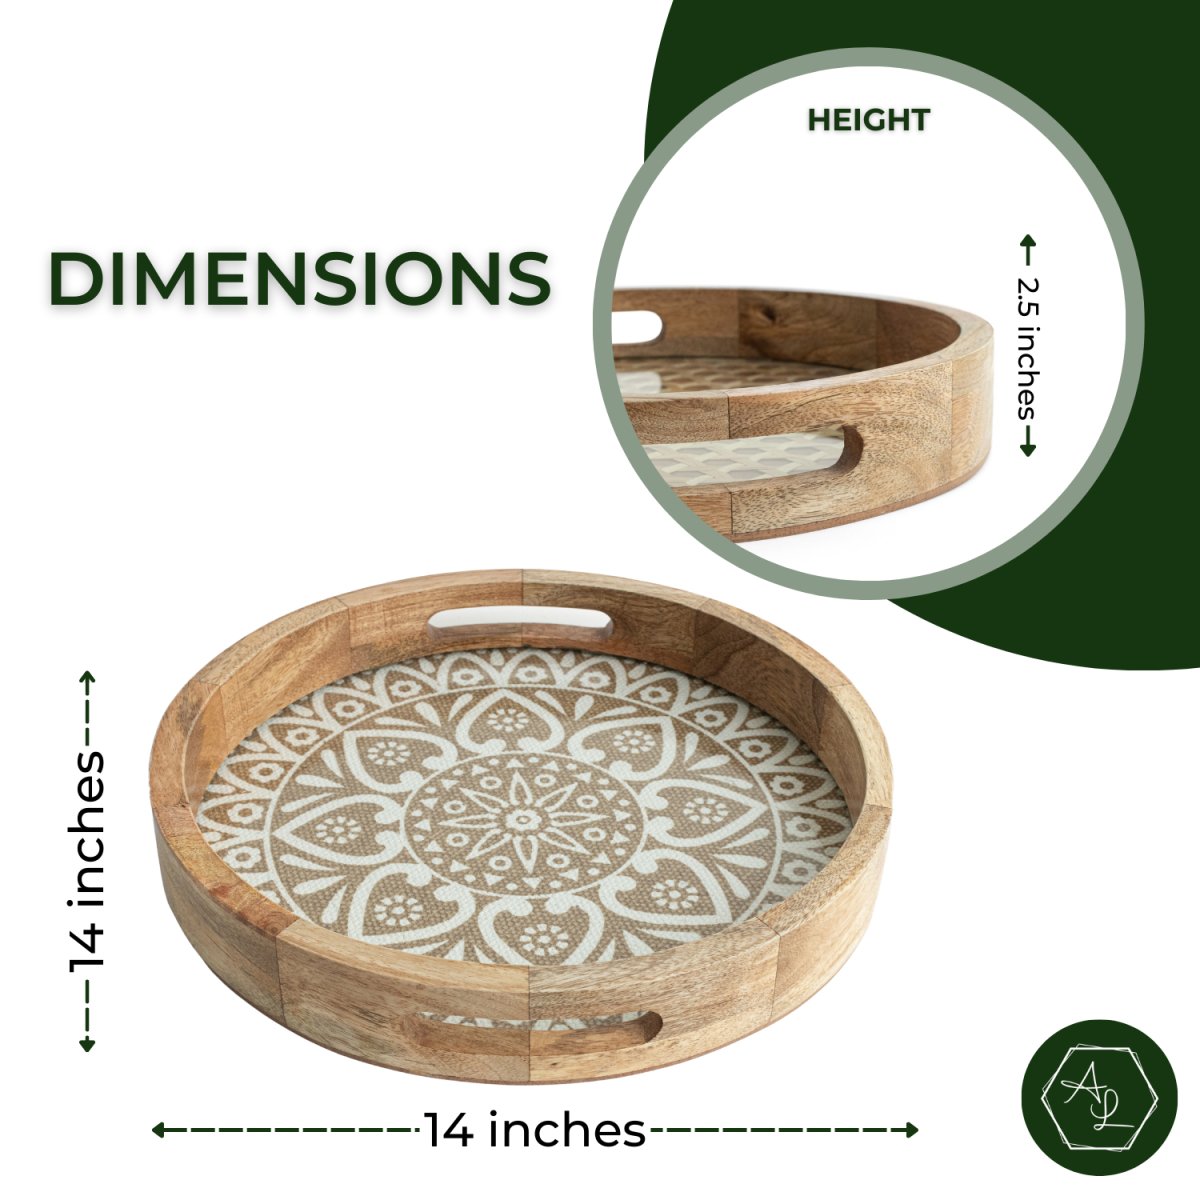 LIBWYS Rustic Wooden Serving Trays with Handle-Set of 2-Decorative Nesting  Food Board Platters for Breakfast, Coffee Table/Butler (Large 15.8x11.8x1.2